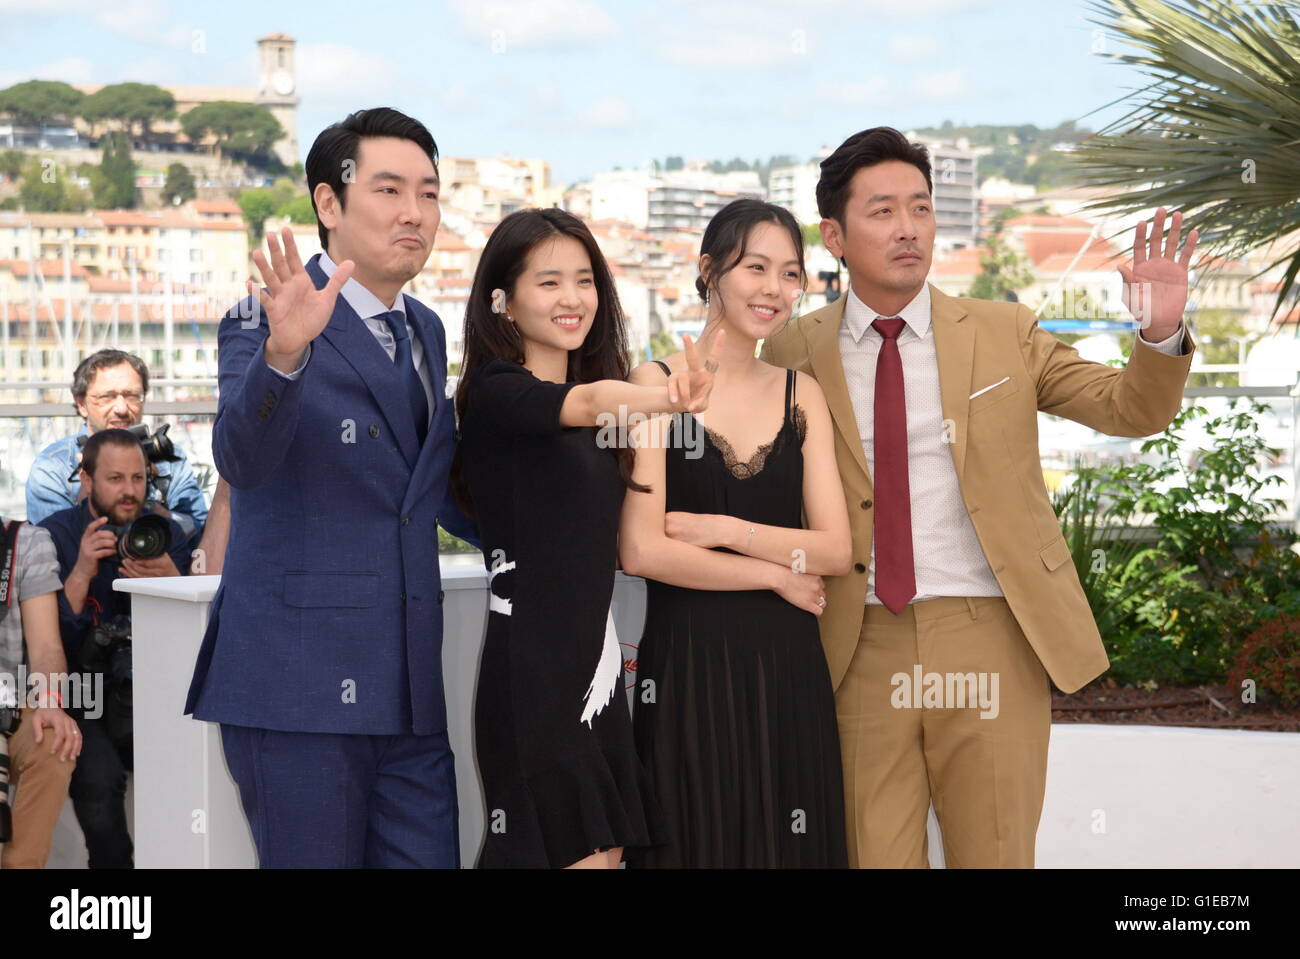 Cannes, France. 11th May, 2016. CANNES, FRANCE - MAY 14: (L-R) Actor Cho Jin-Woong, actress Kim Tae-Ri, diretor Park Chan-Wook, actress Kim Min-Hee and actor Ha Jung-Woo attend 'The Handmaiden (Mademoiselle)' photocall during the 69th annual Cannes Film Festival at the Palais des Festivals on May 14, 2016 in Cannes, France. © Frederick Injimbert/ZUMA Wire/Alamy Live News Stock Photo